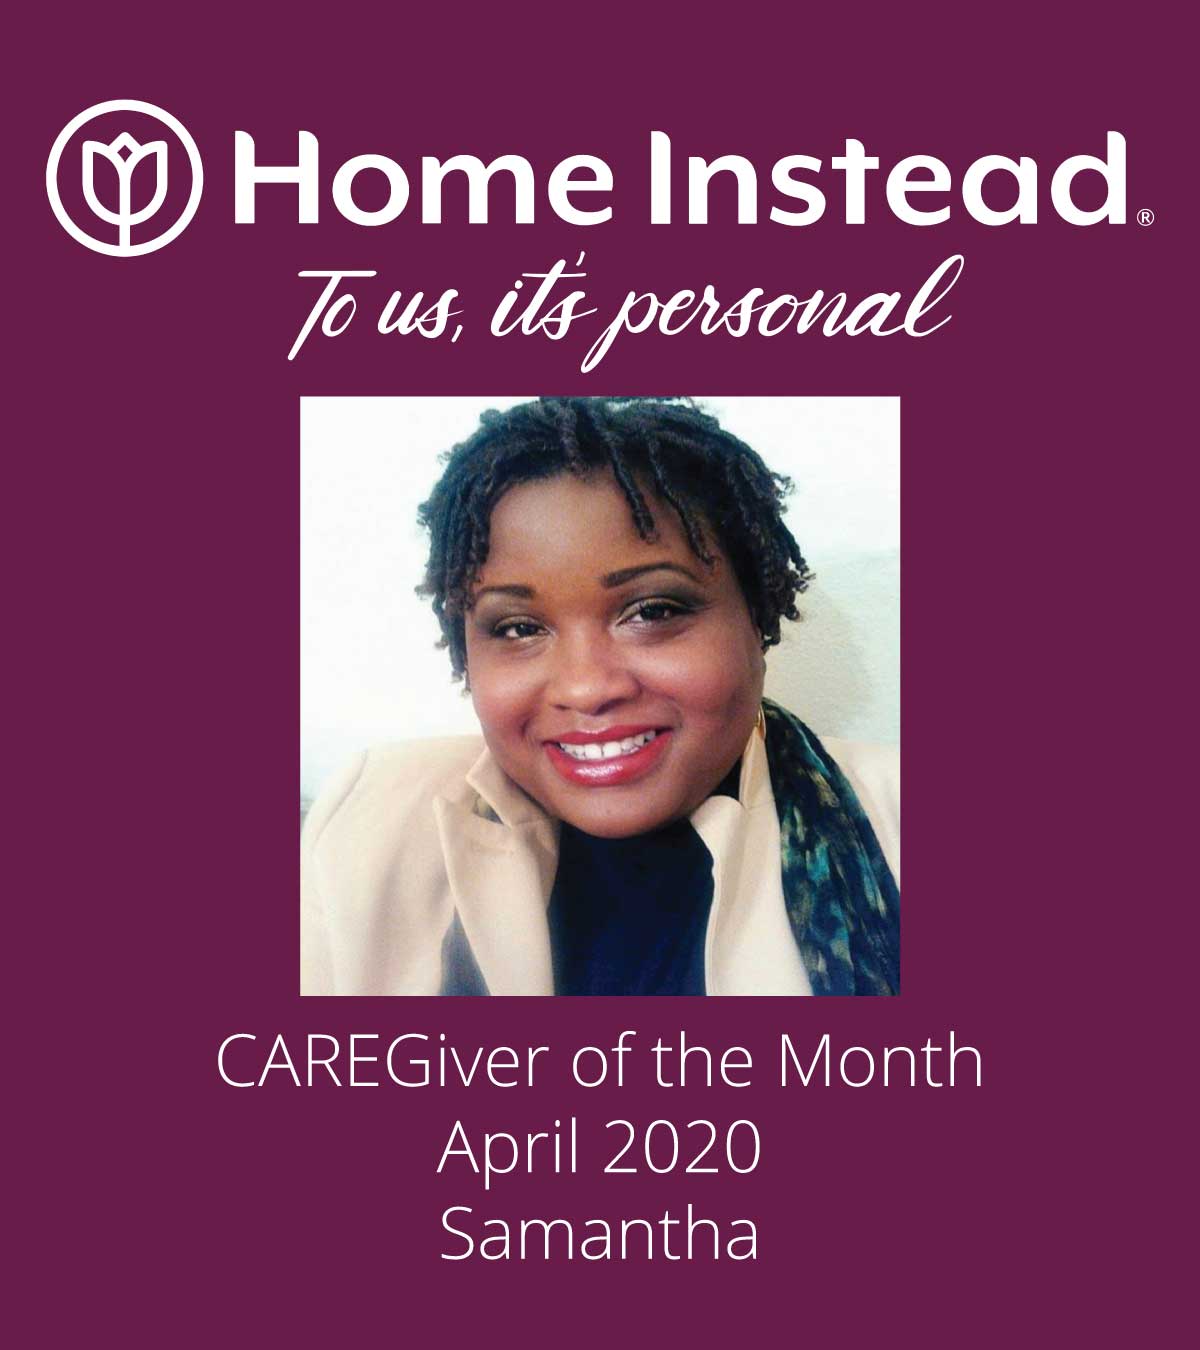 Home Instead Caregiver of the Month Samantha